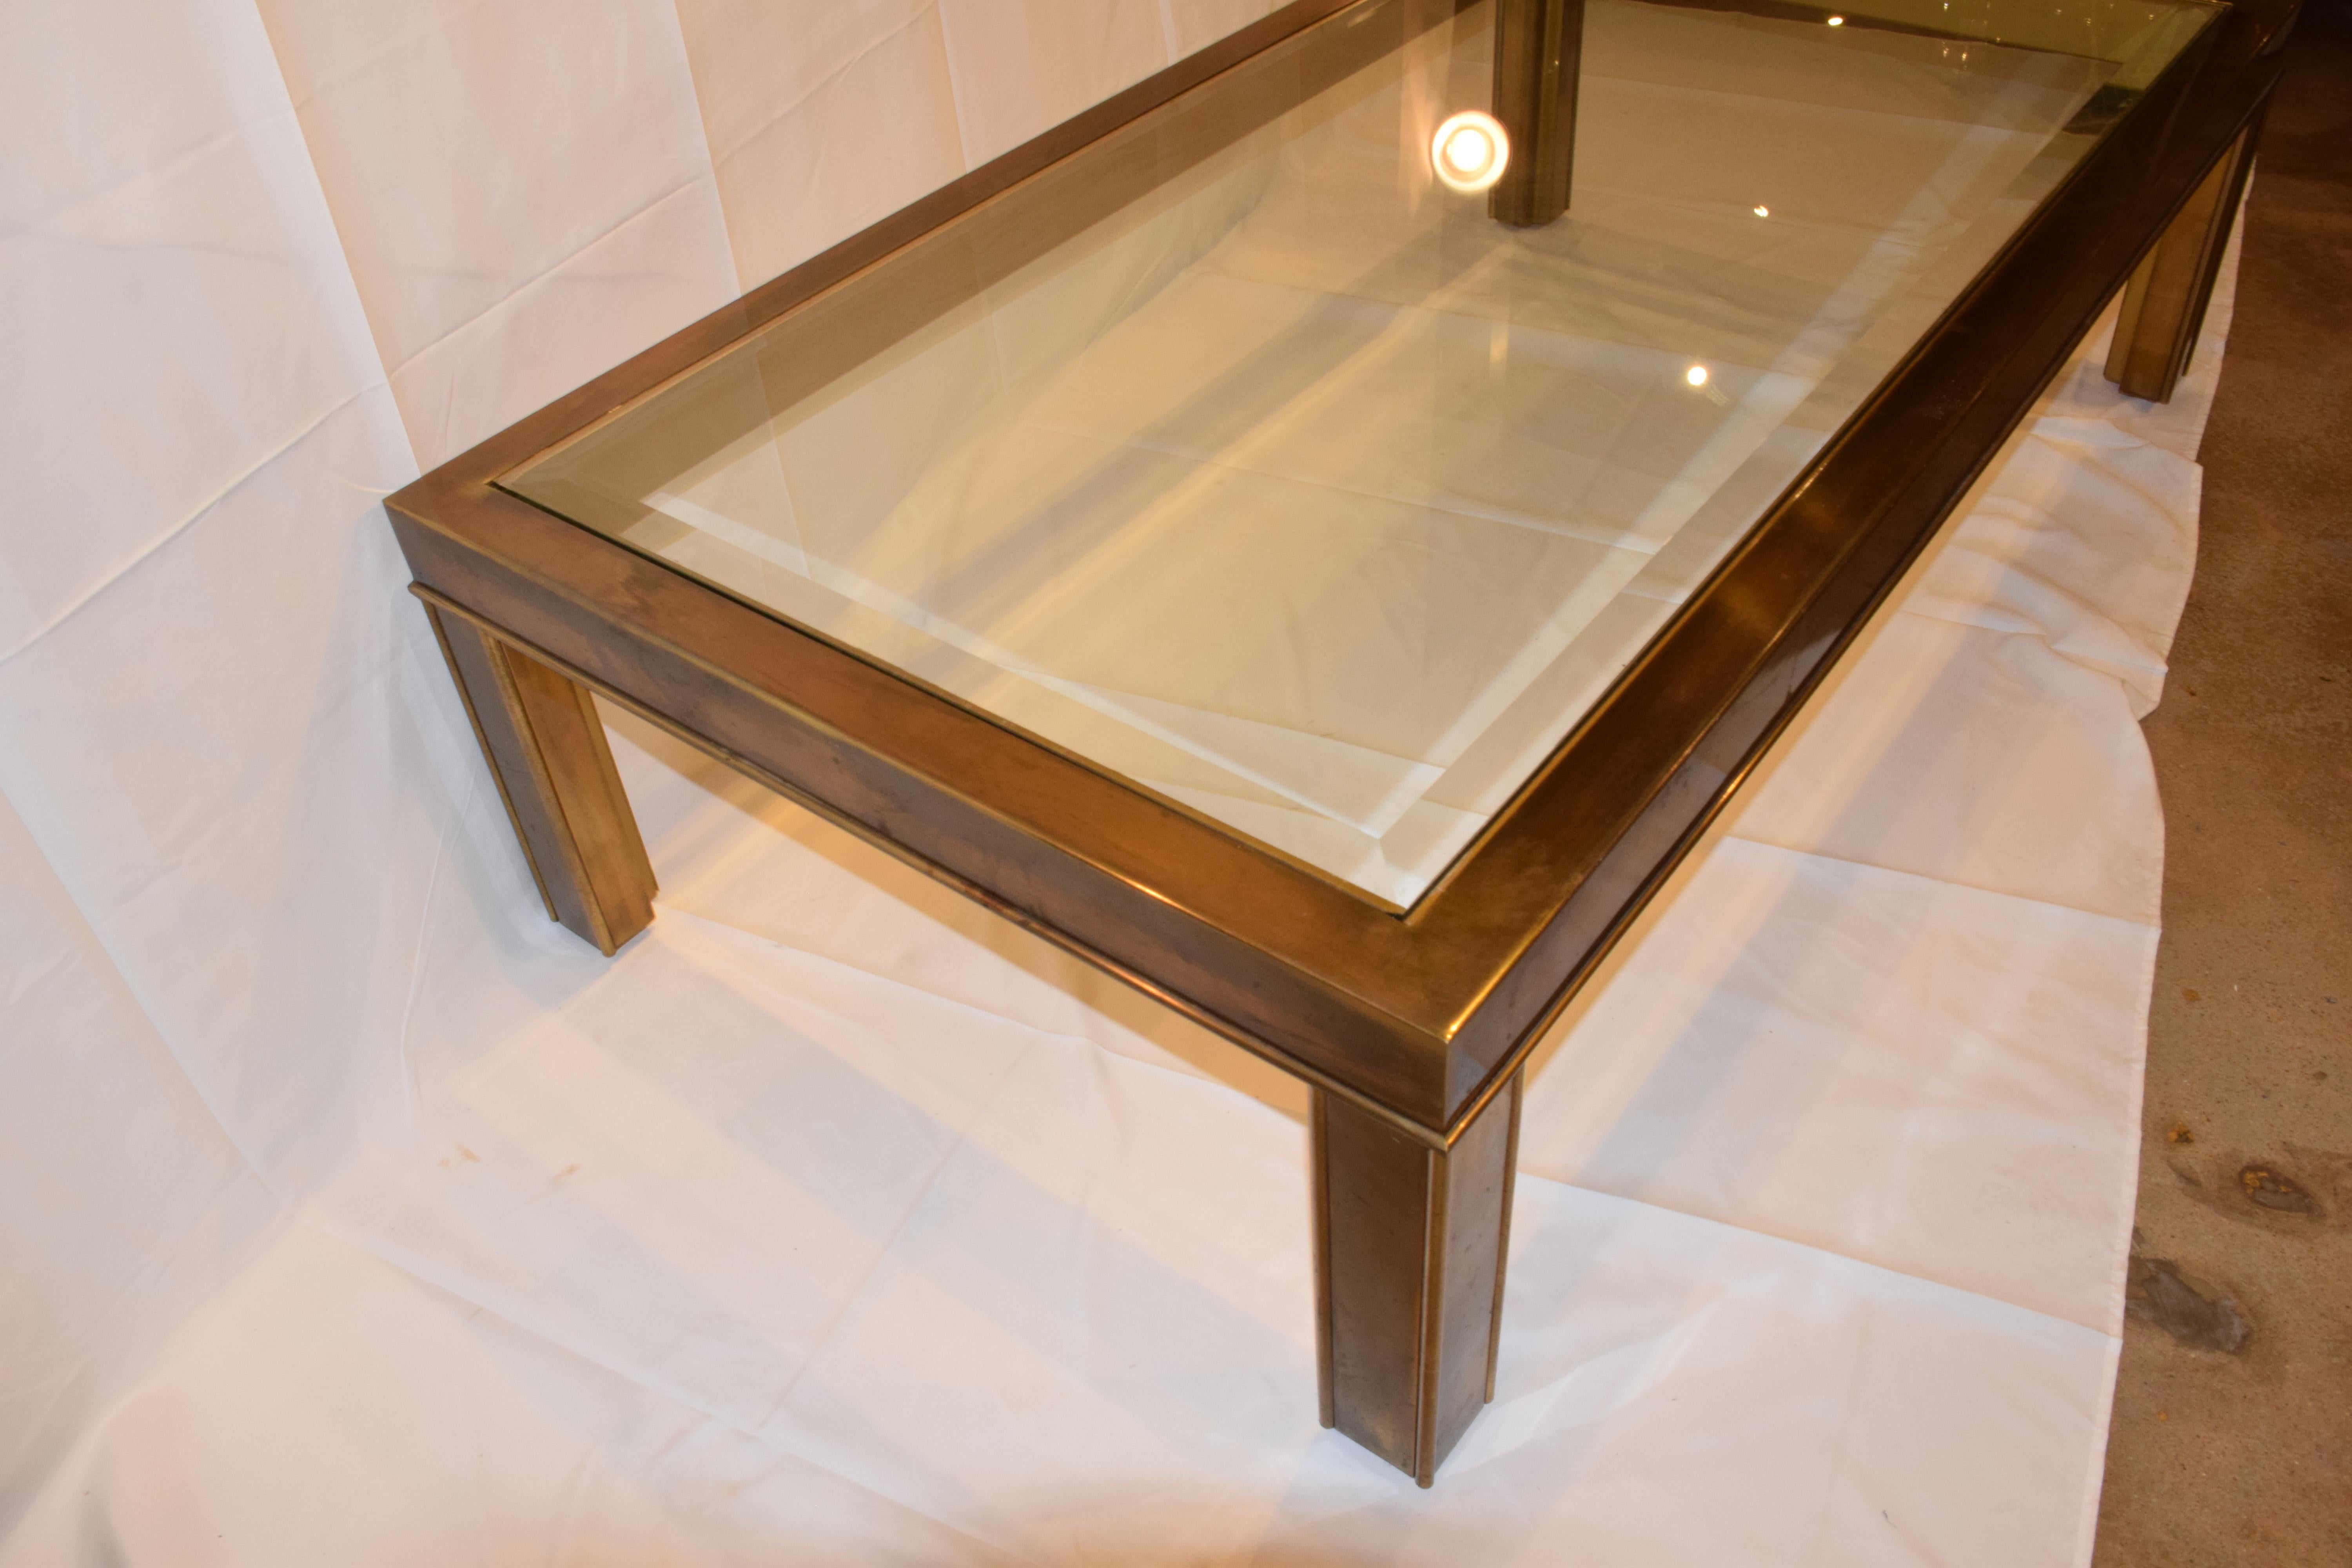 This is a rectangular brass cocktail or coffee table with original beveled glass inset top, by Mastercraft. The brass has aged with a lovely patina, and the piece is in very good vintage condition. This is a beautiful piece to add Mid-Century Modern